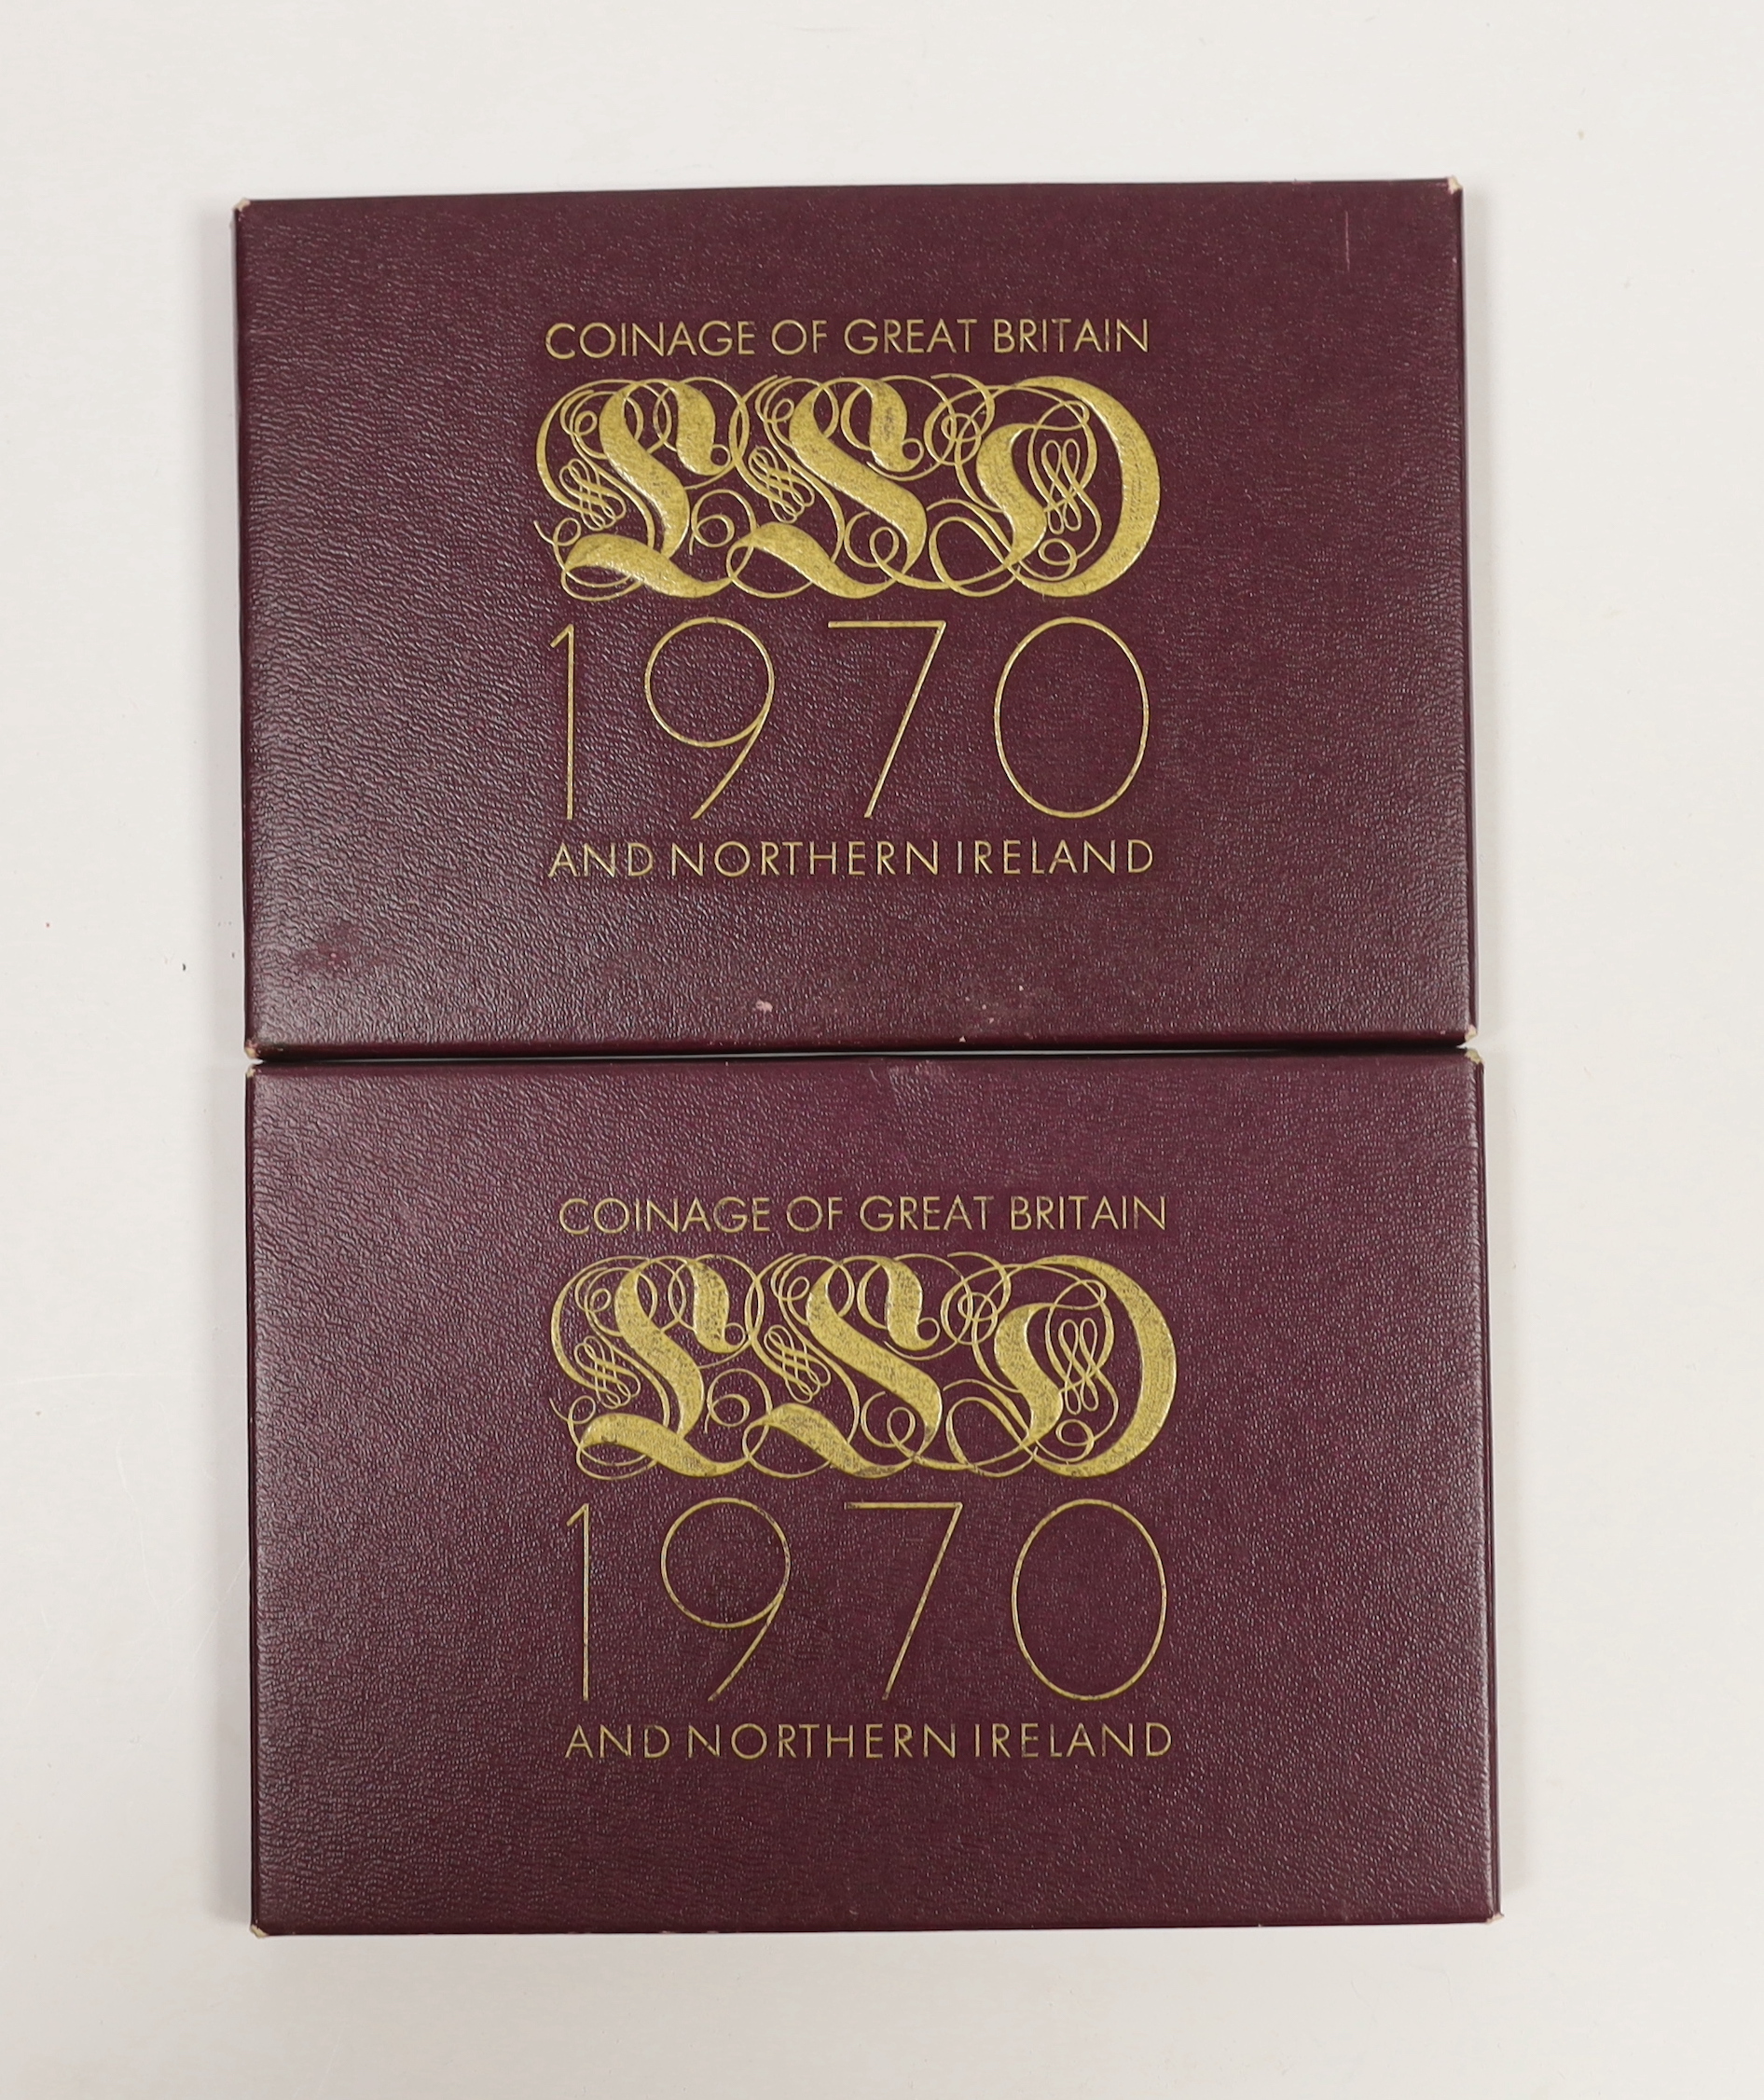 Two UK Brilliant proof coin sets, 1970